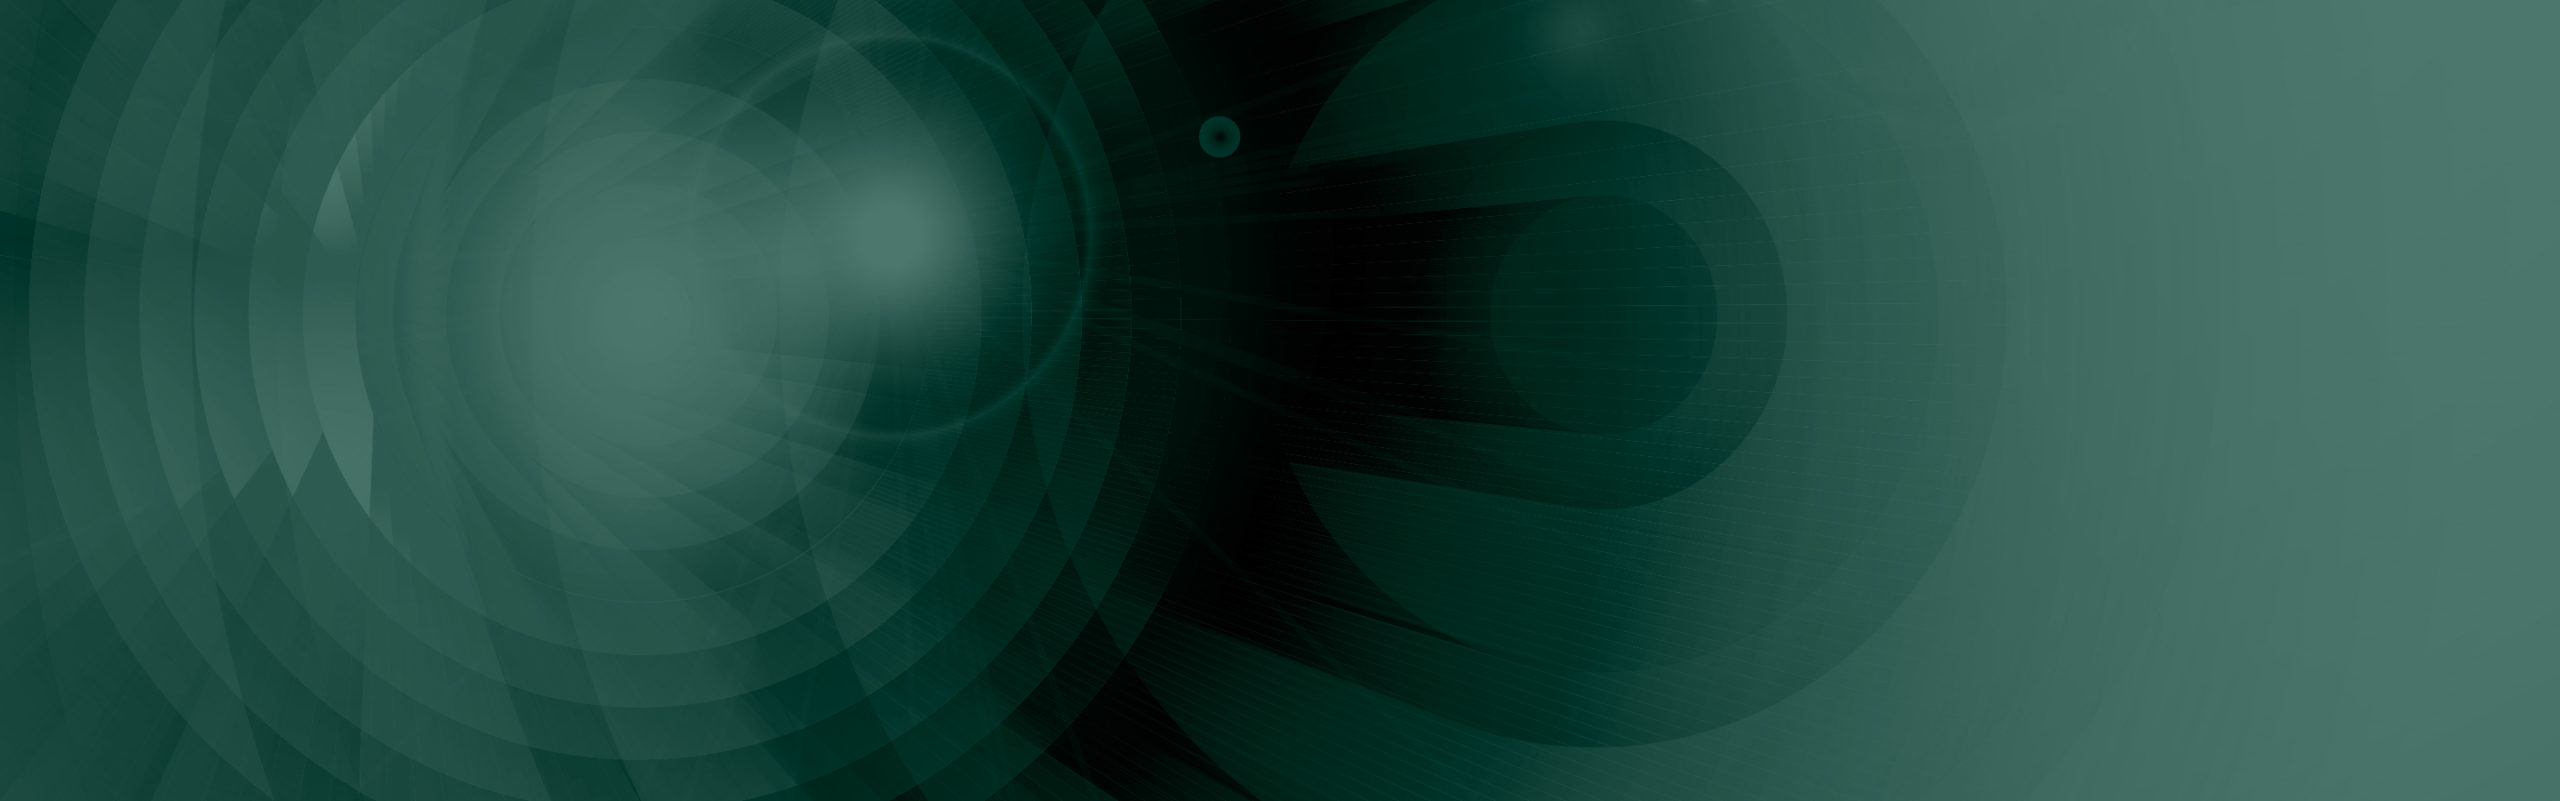 Green Background Image with Ripple texture